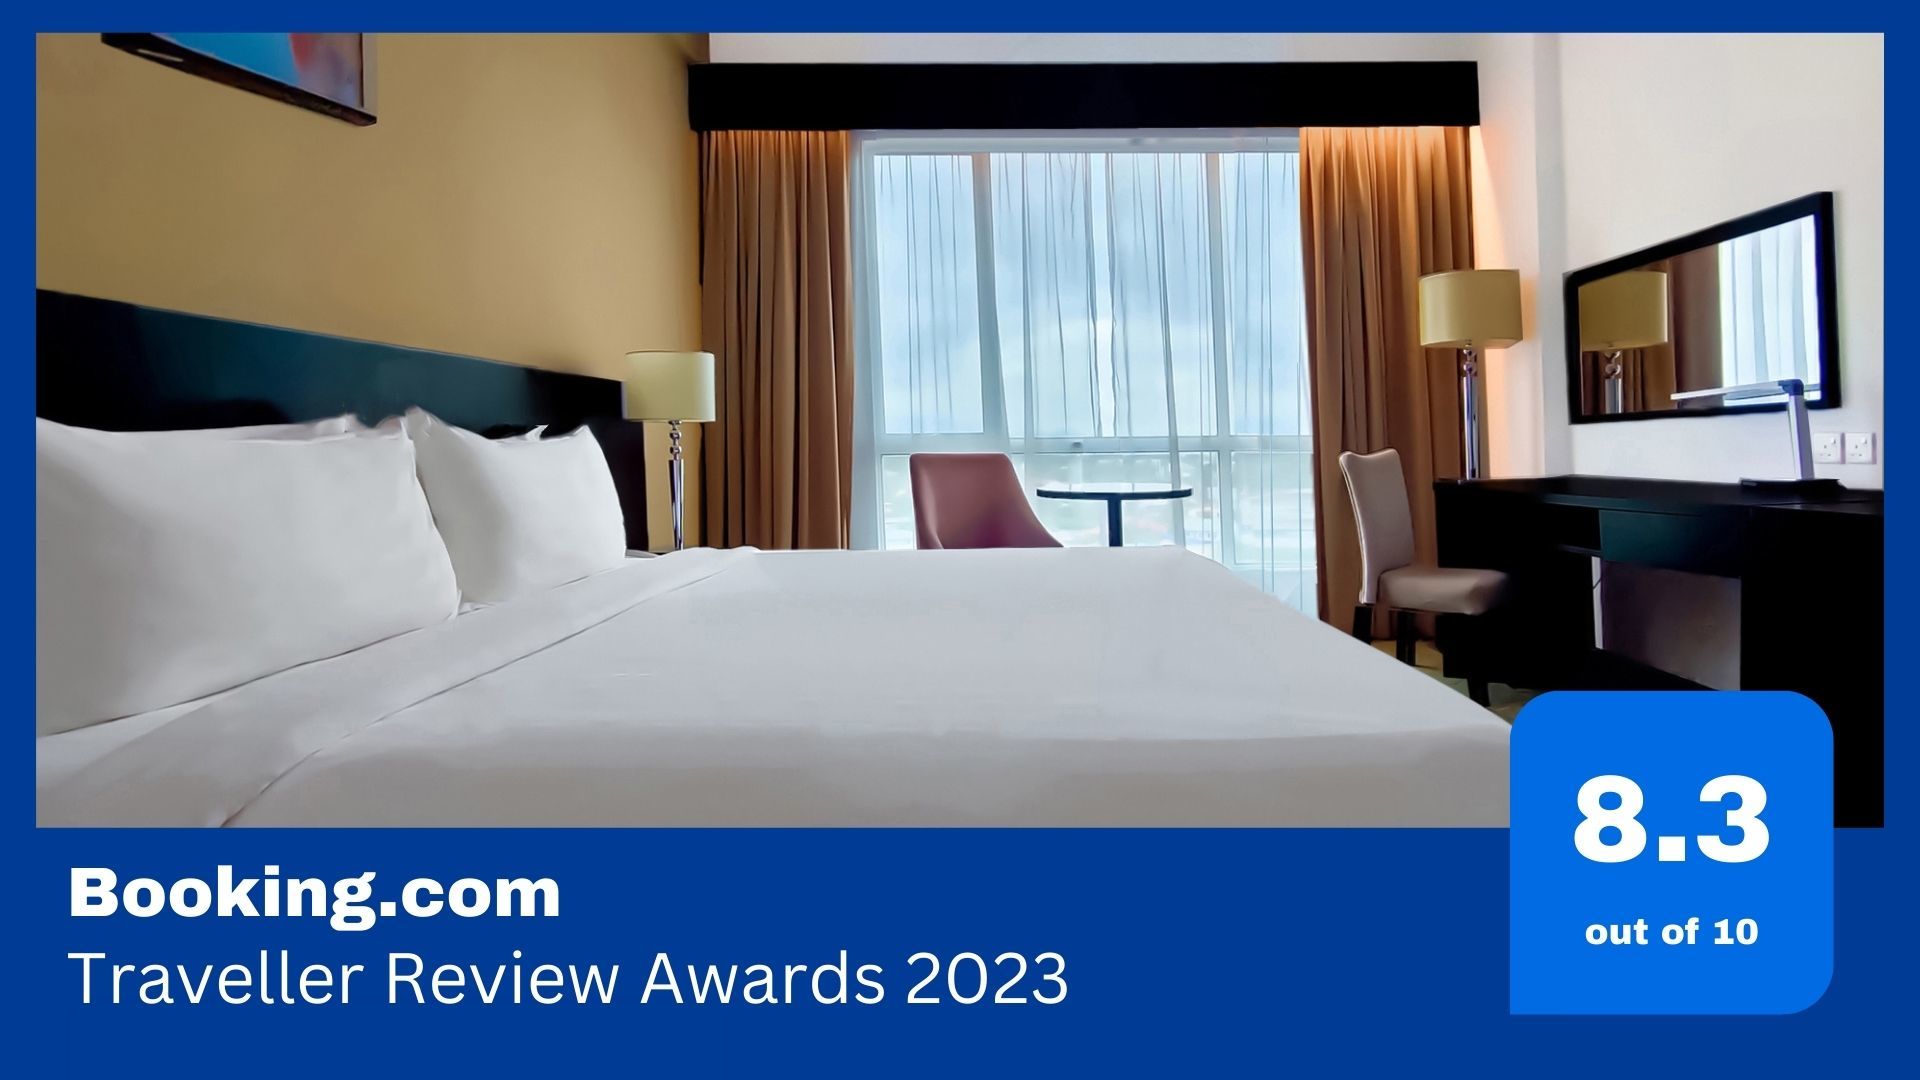 Image of Pan Borneo Hotel Kota Kinabalu are honoured to achieve Booking.com Traveller Review Awards 2023